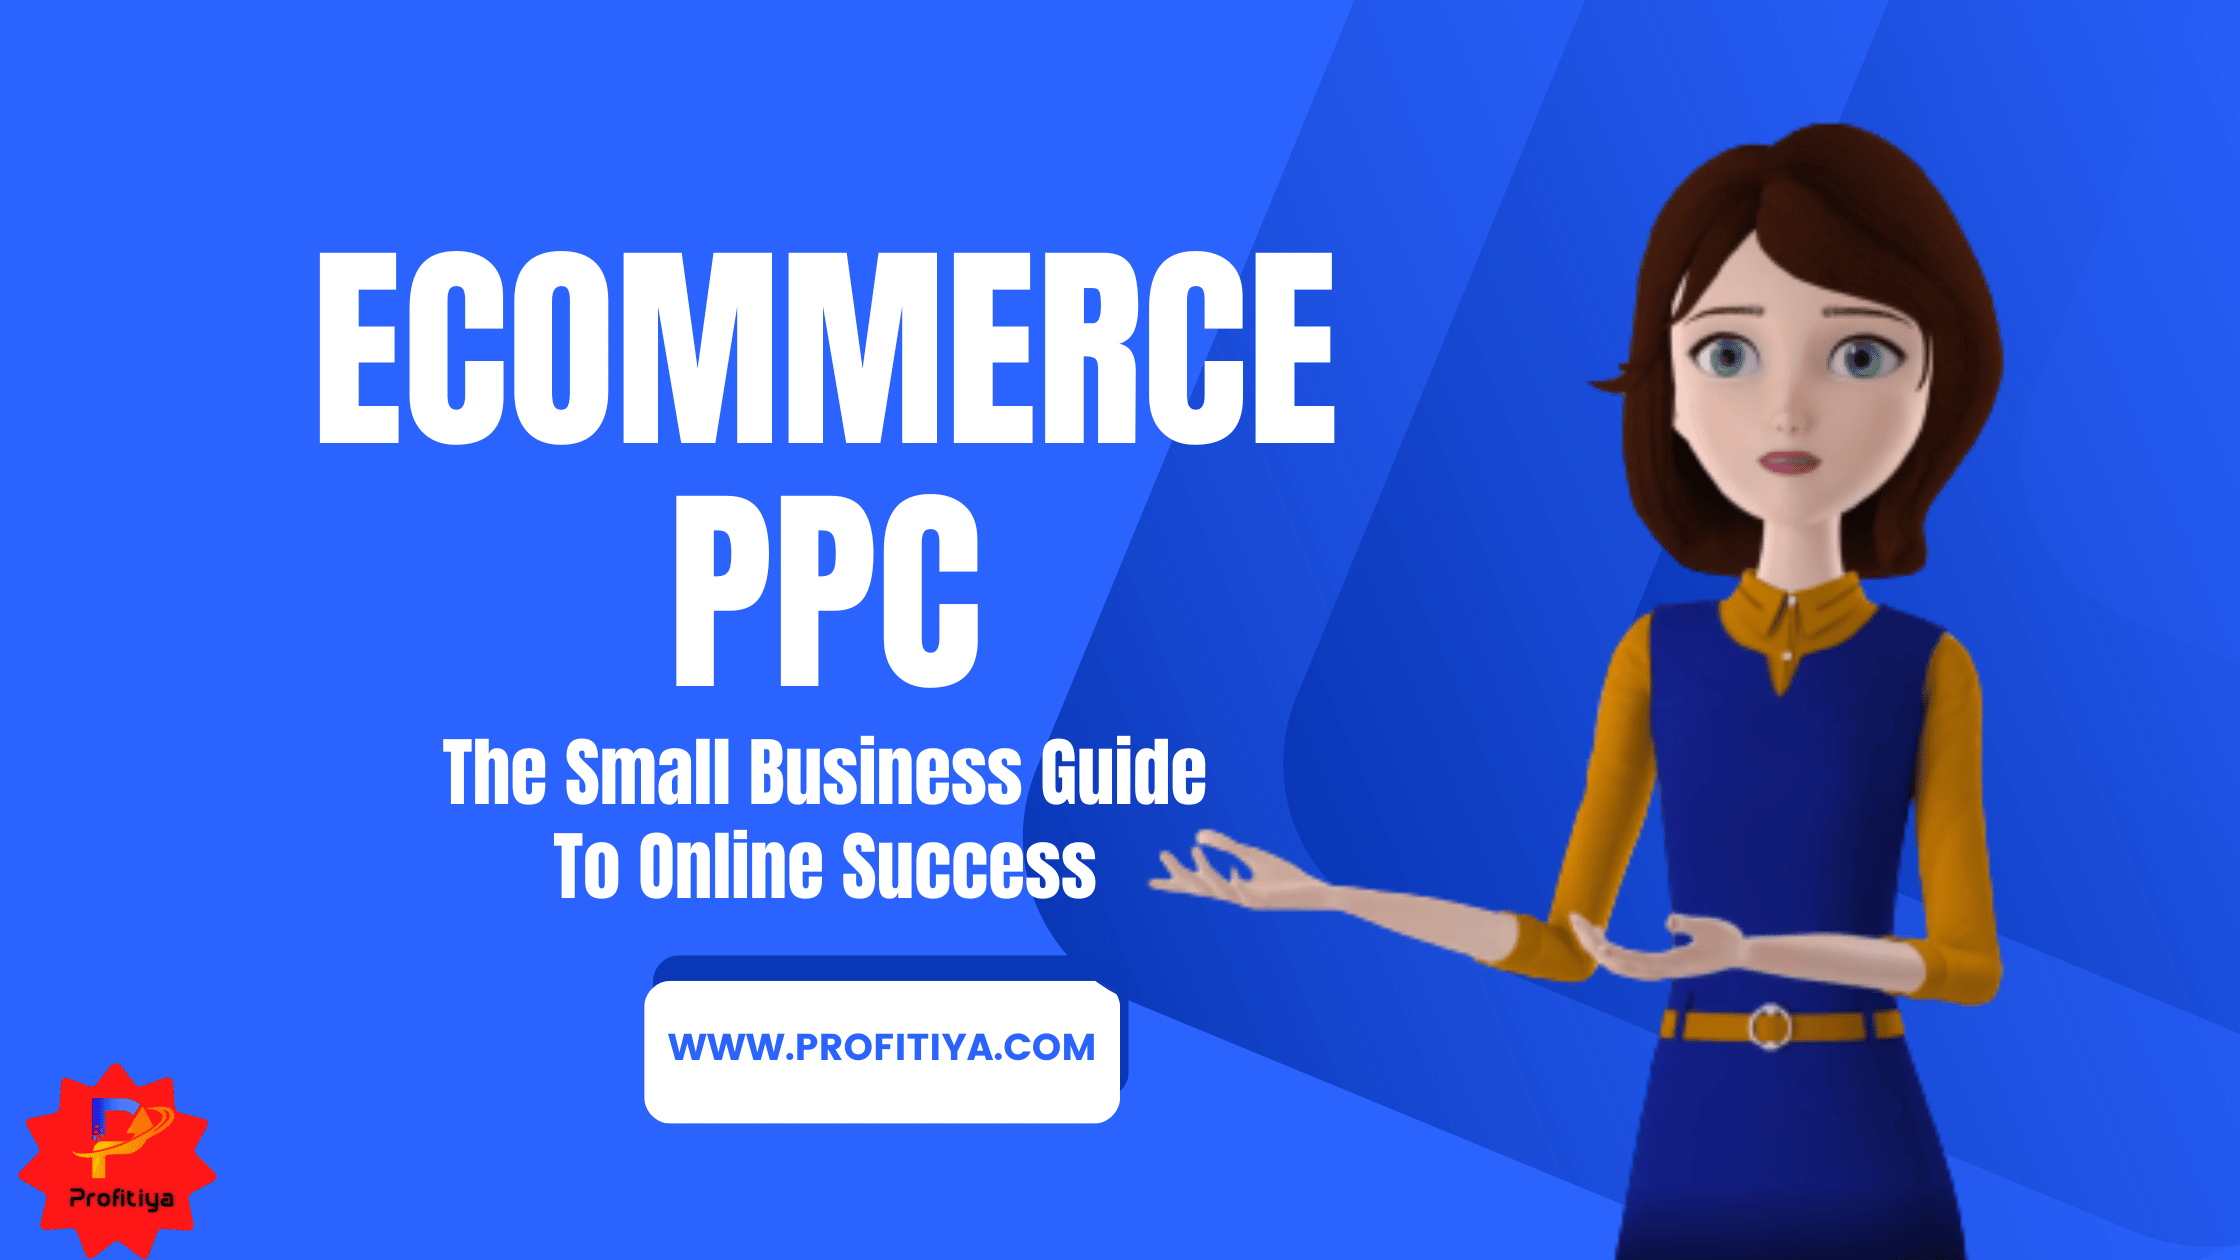 Ecommerce PPC - The Small Business Guide To Online Success